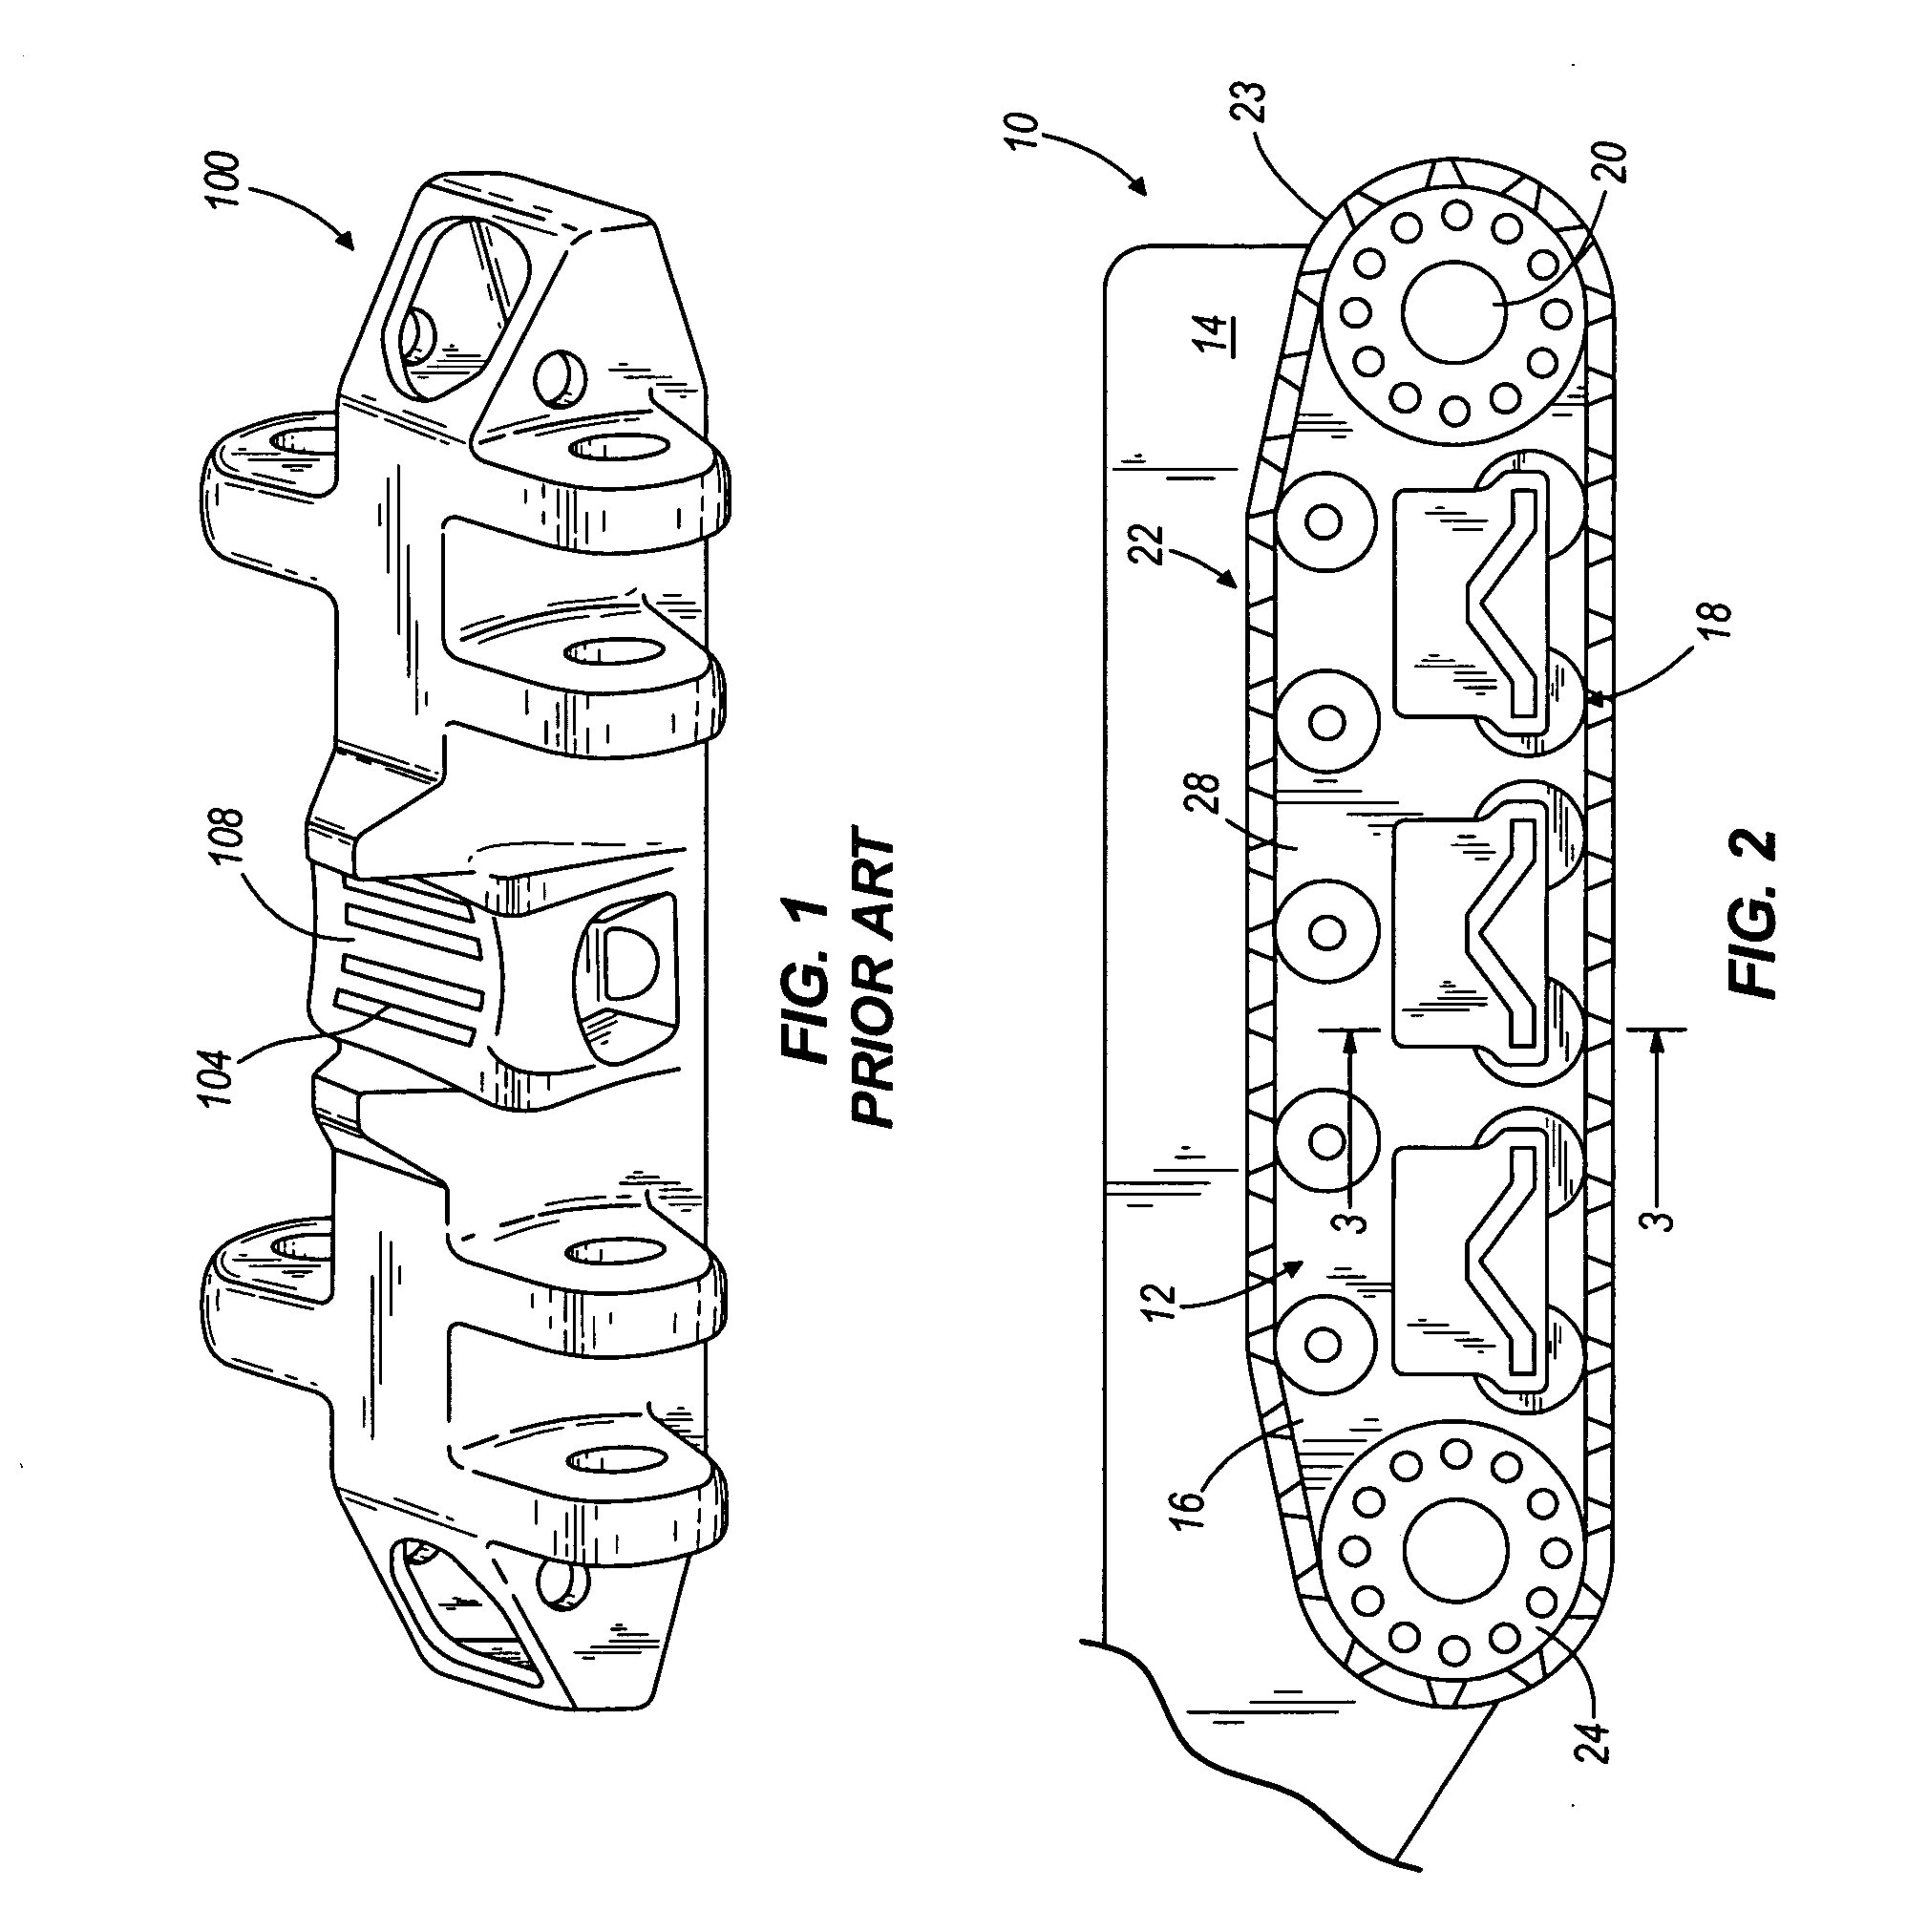 Crawler shoe with peening pads in roller path